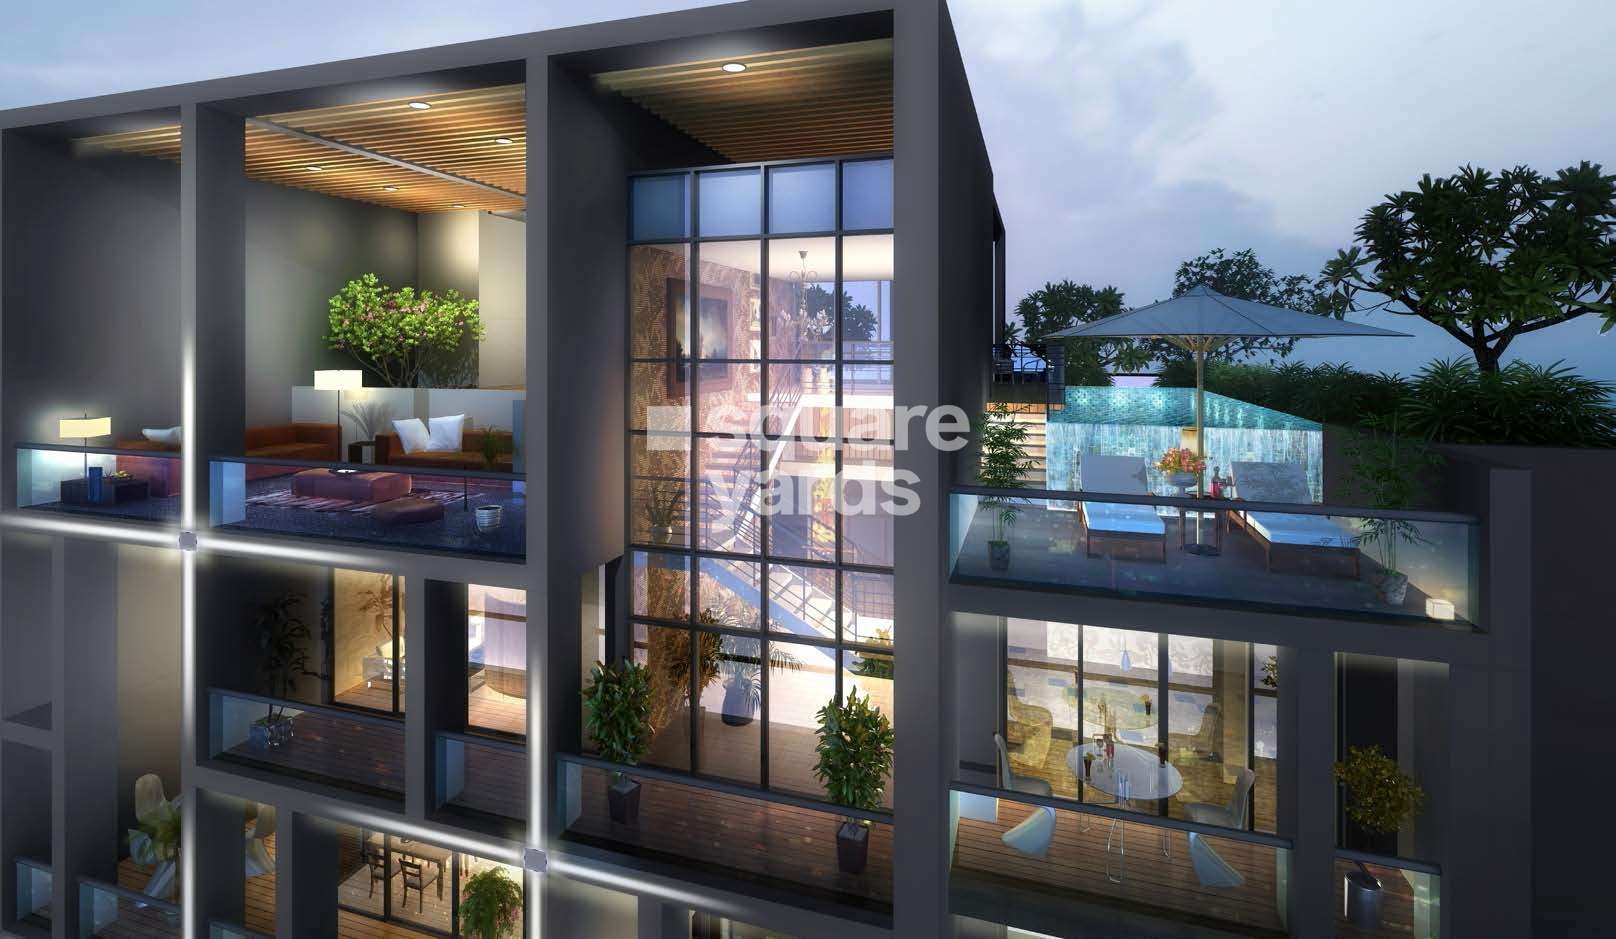 abil verde project amenities features11